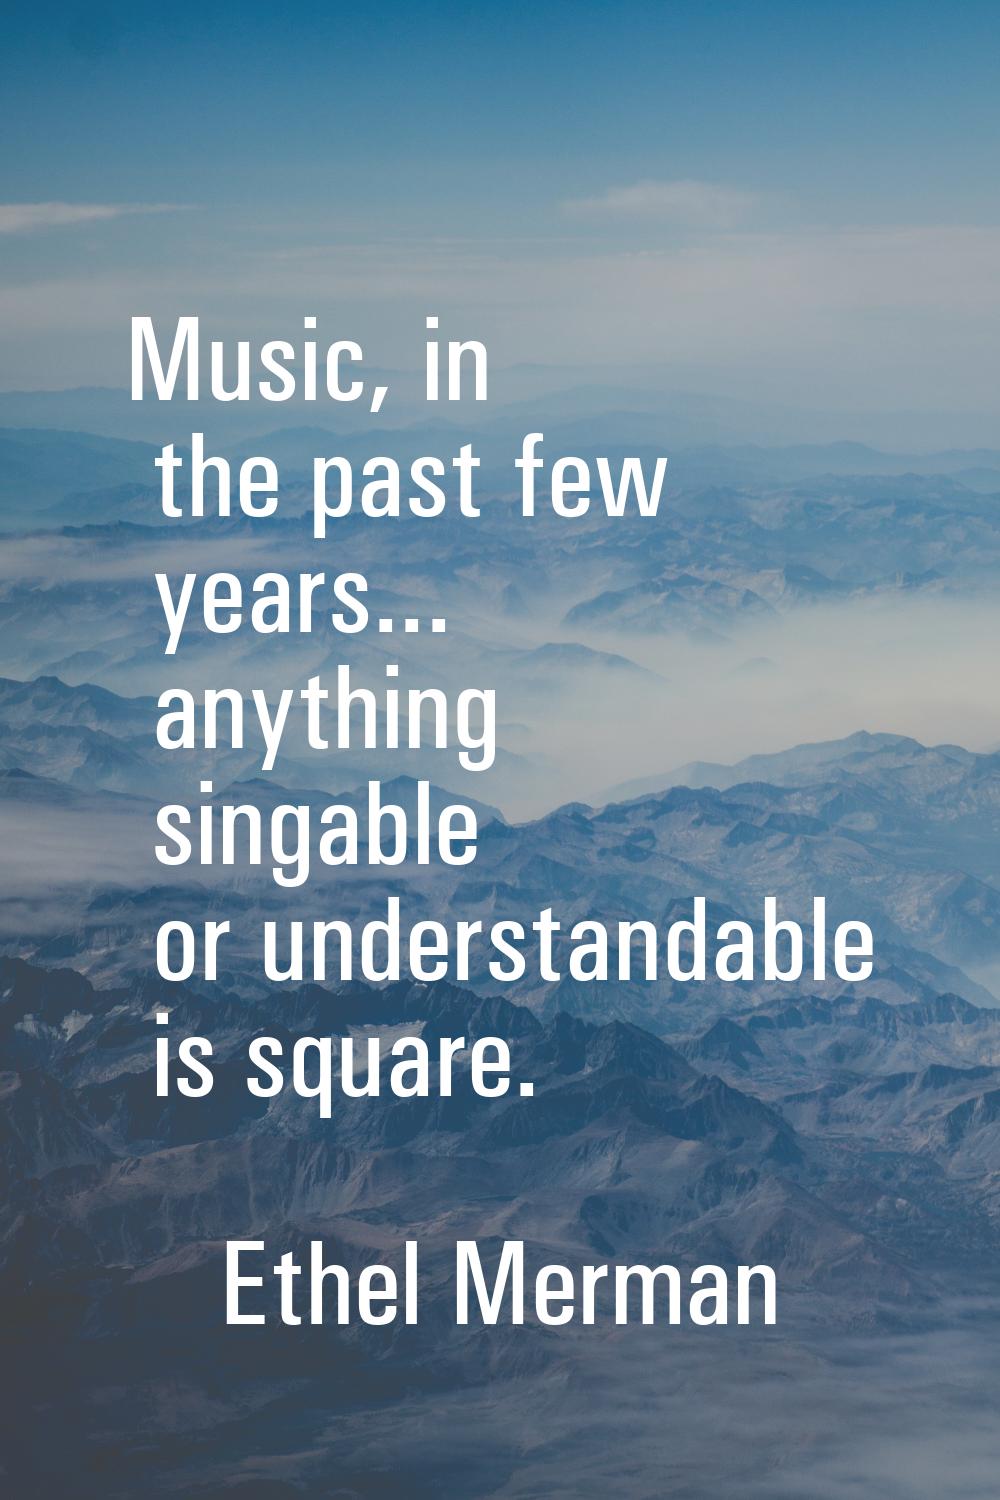 Music, in the past few years... anything singable or understandable is square.